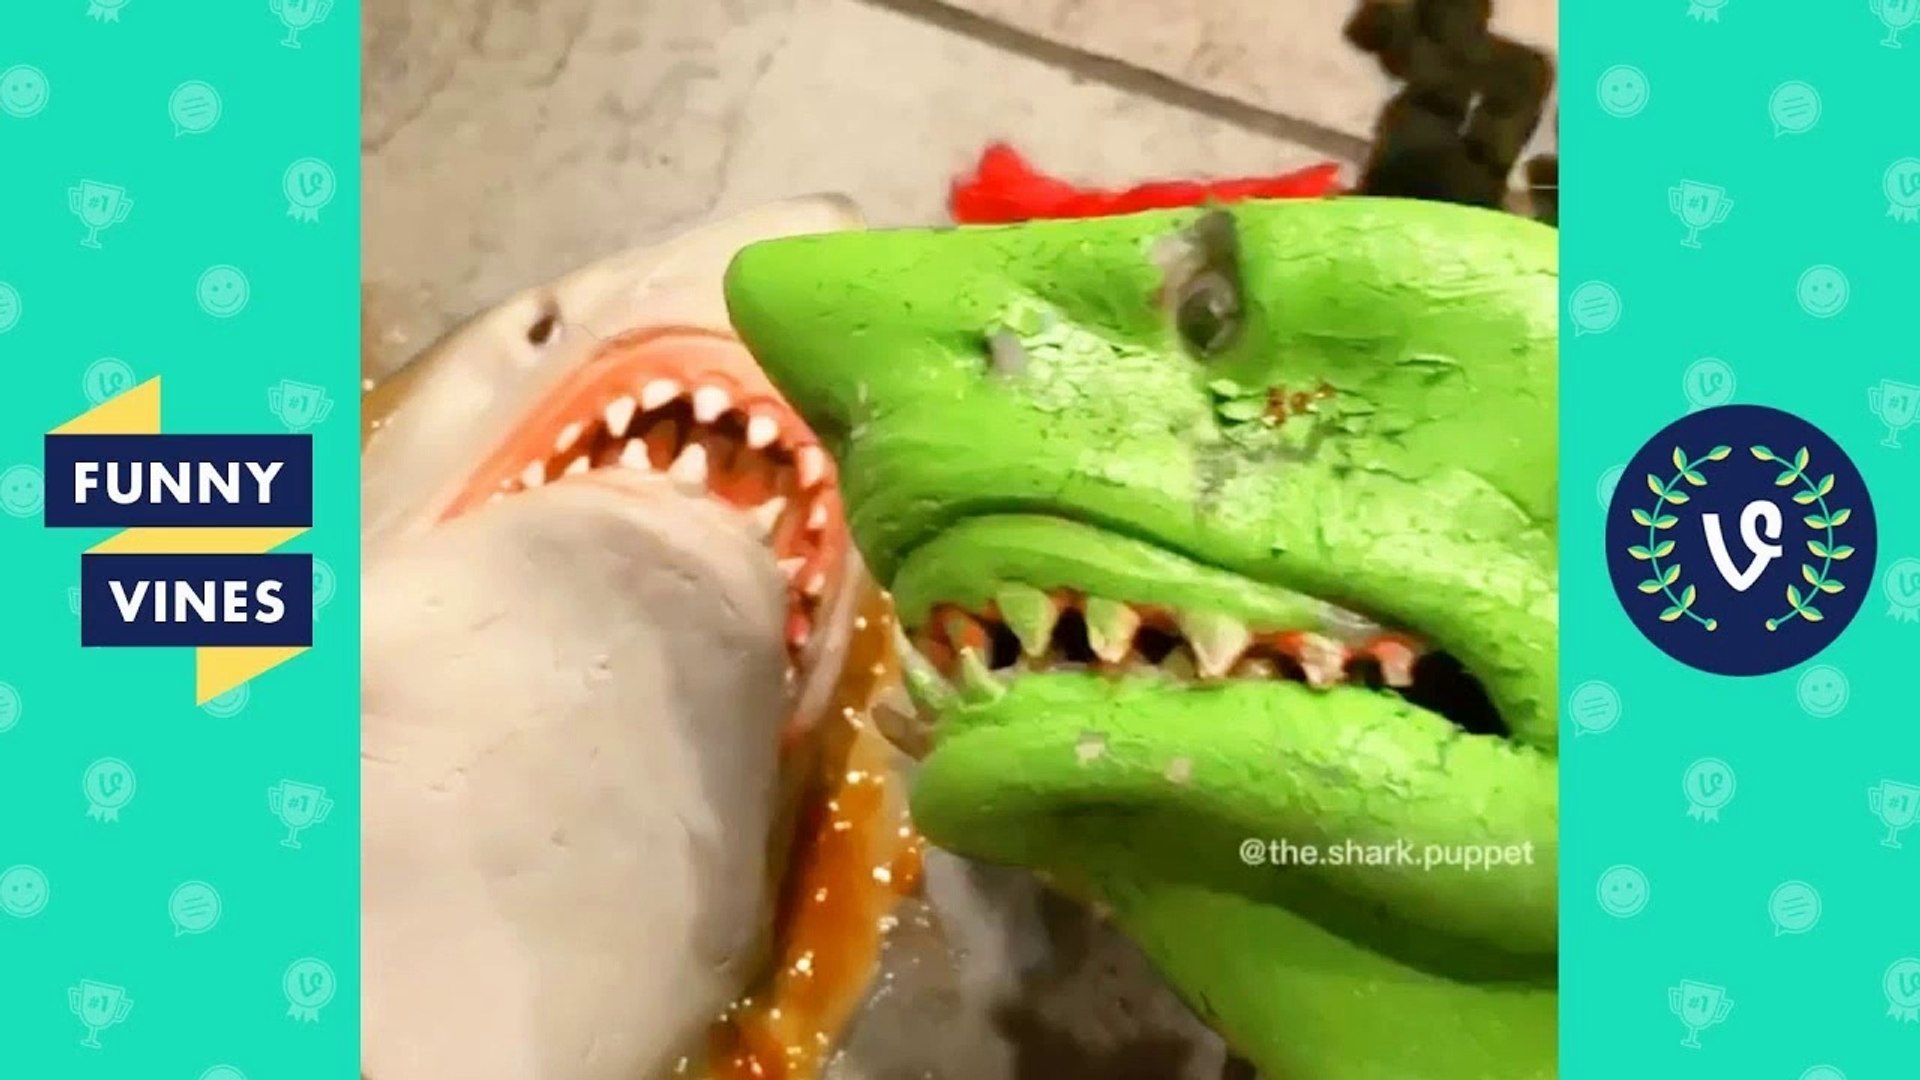 TRY NOT TO LAUGH - Funny Shark Puppet Instagram Videos! - video Dailymotion